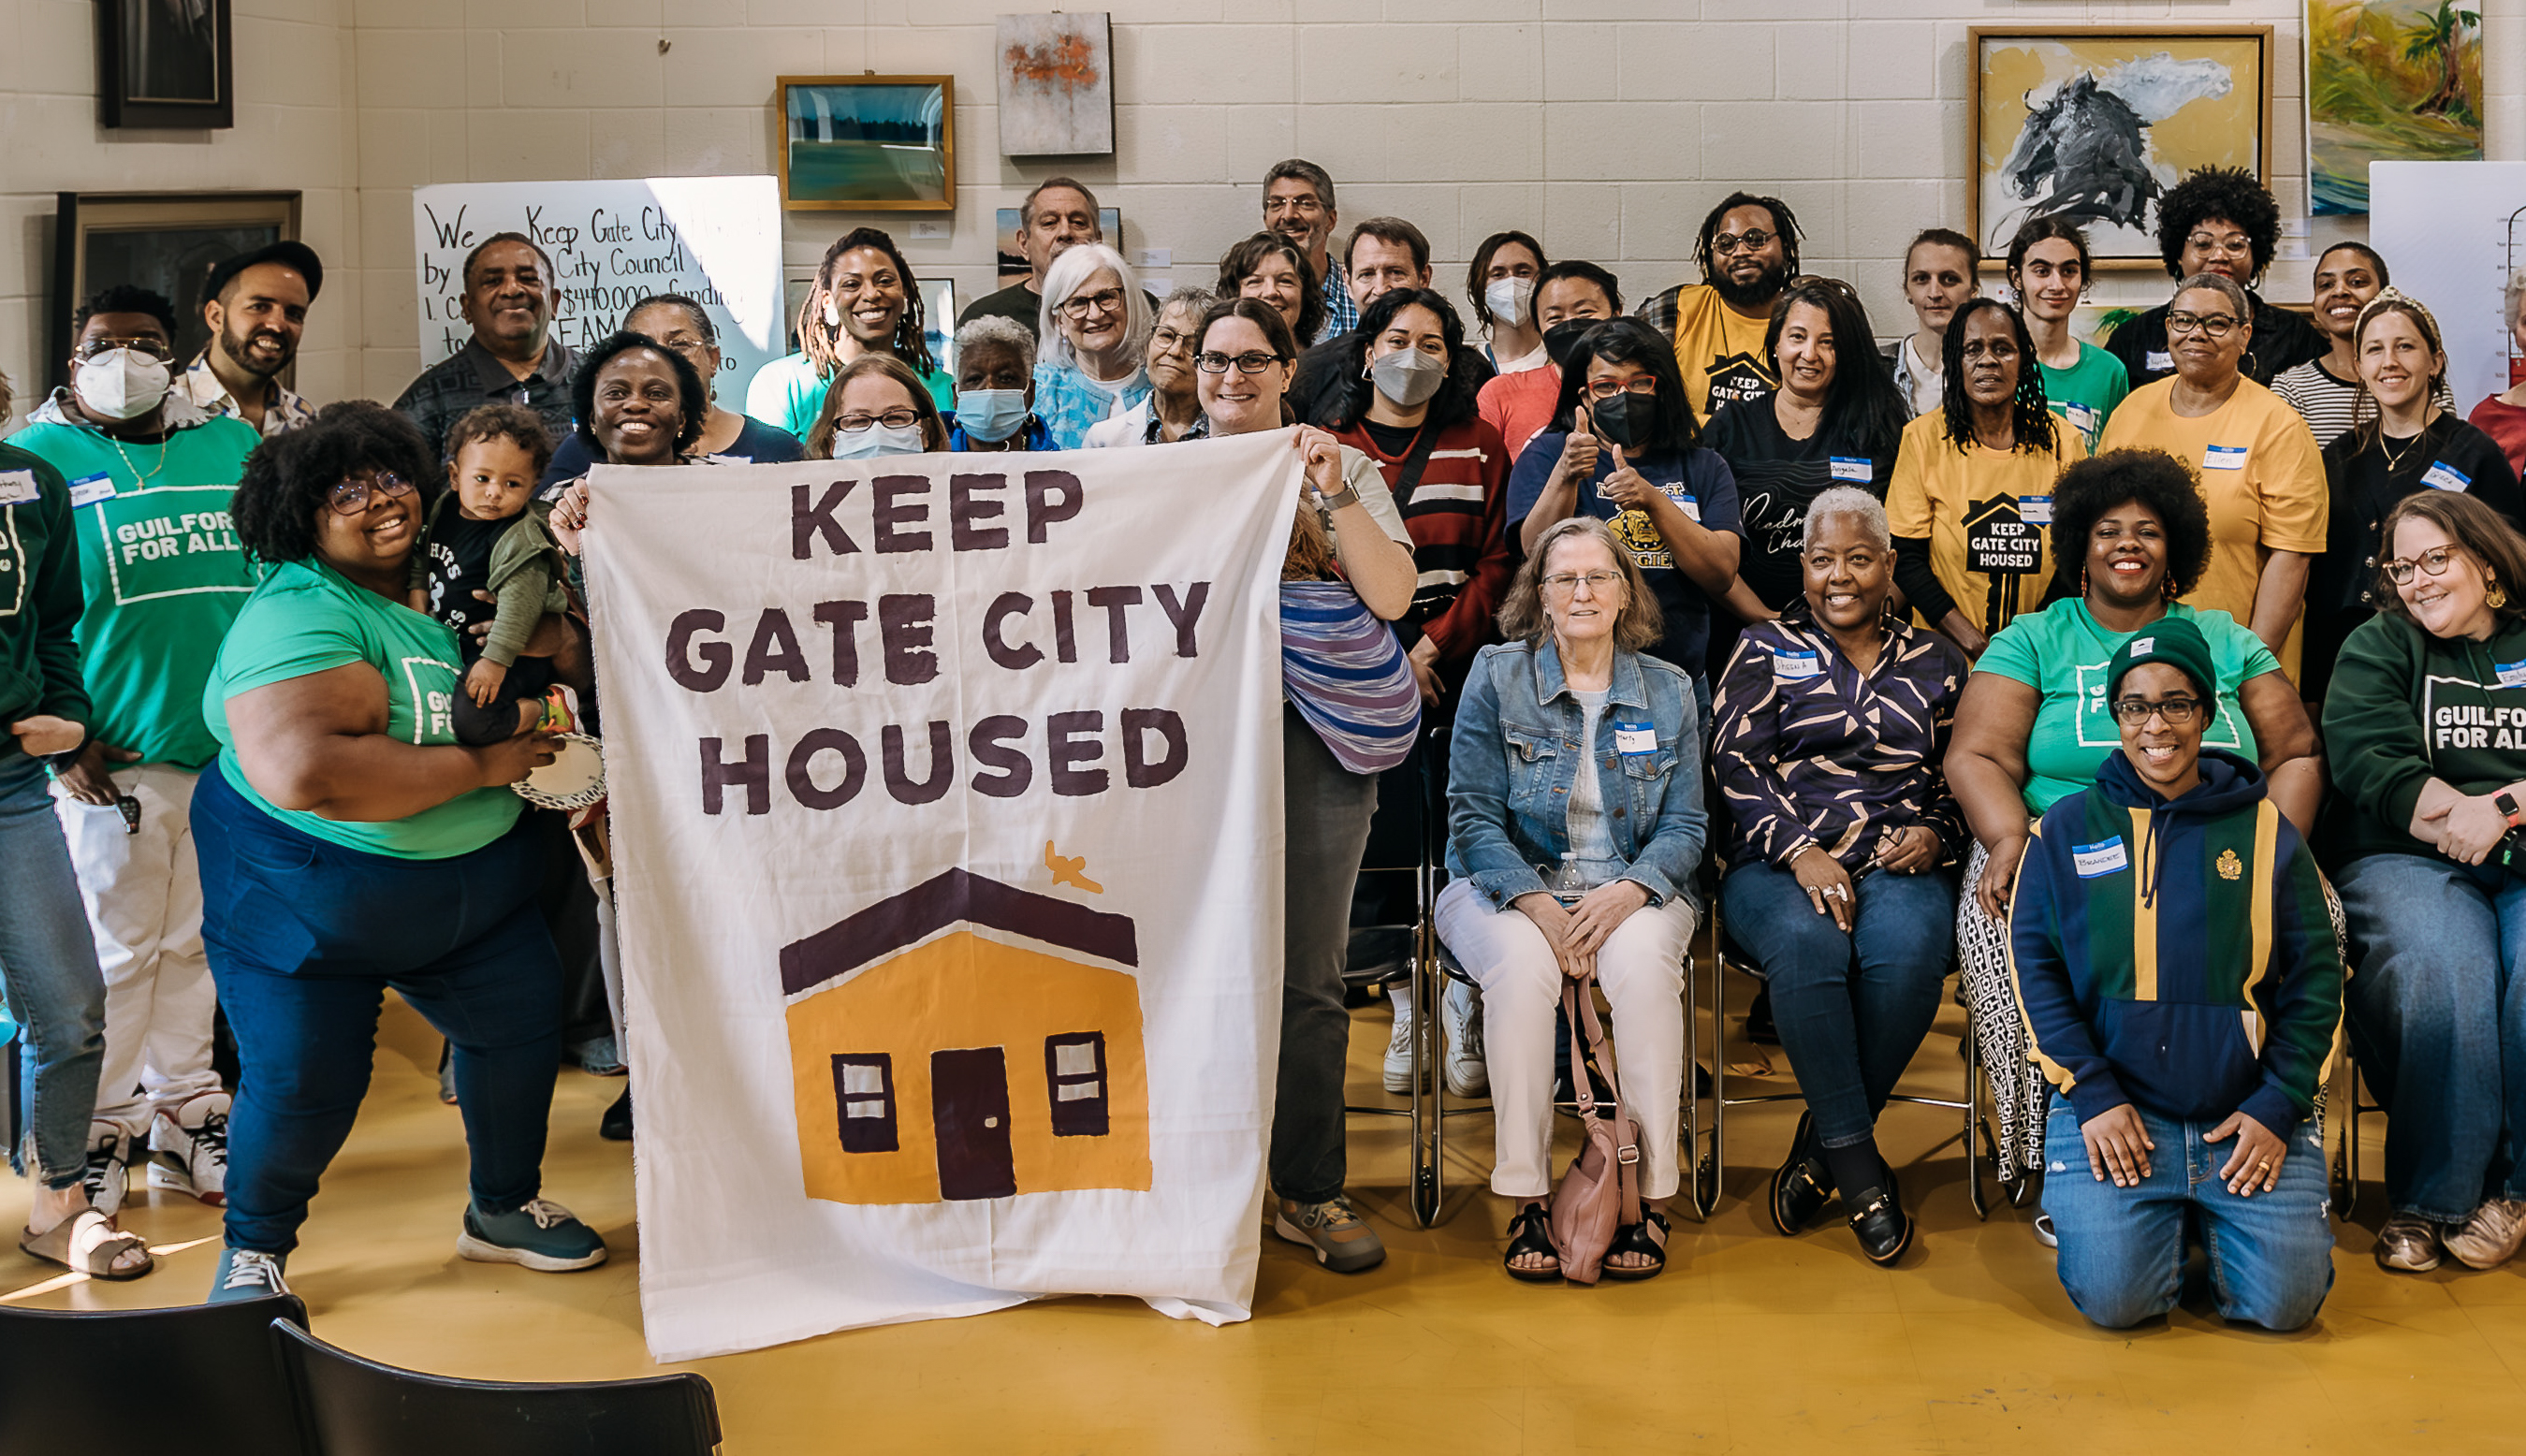 Image of group with 'Keep Gate City Housed' banner, cropped